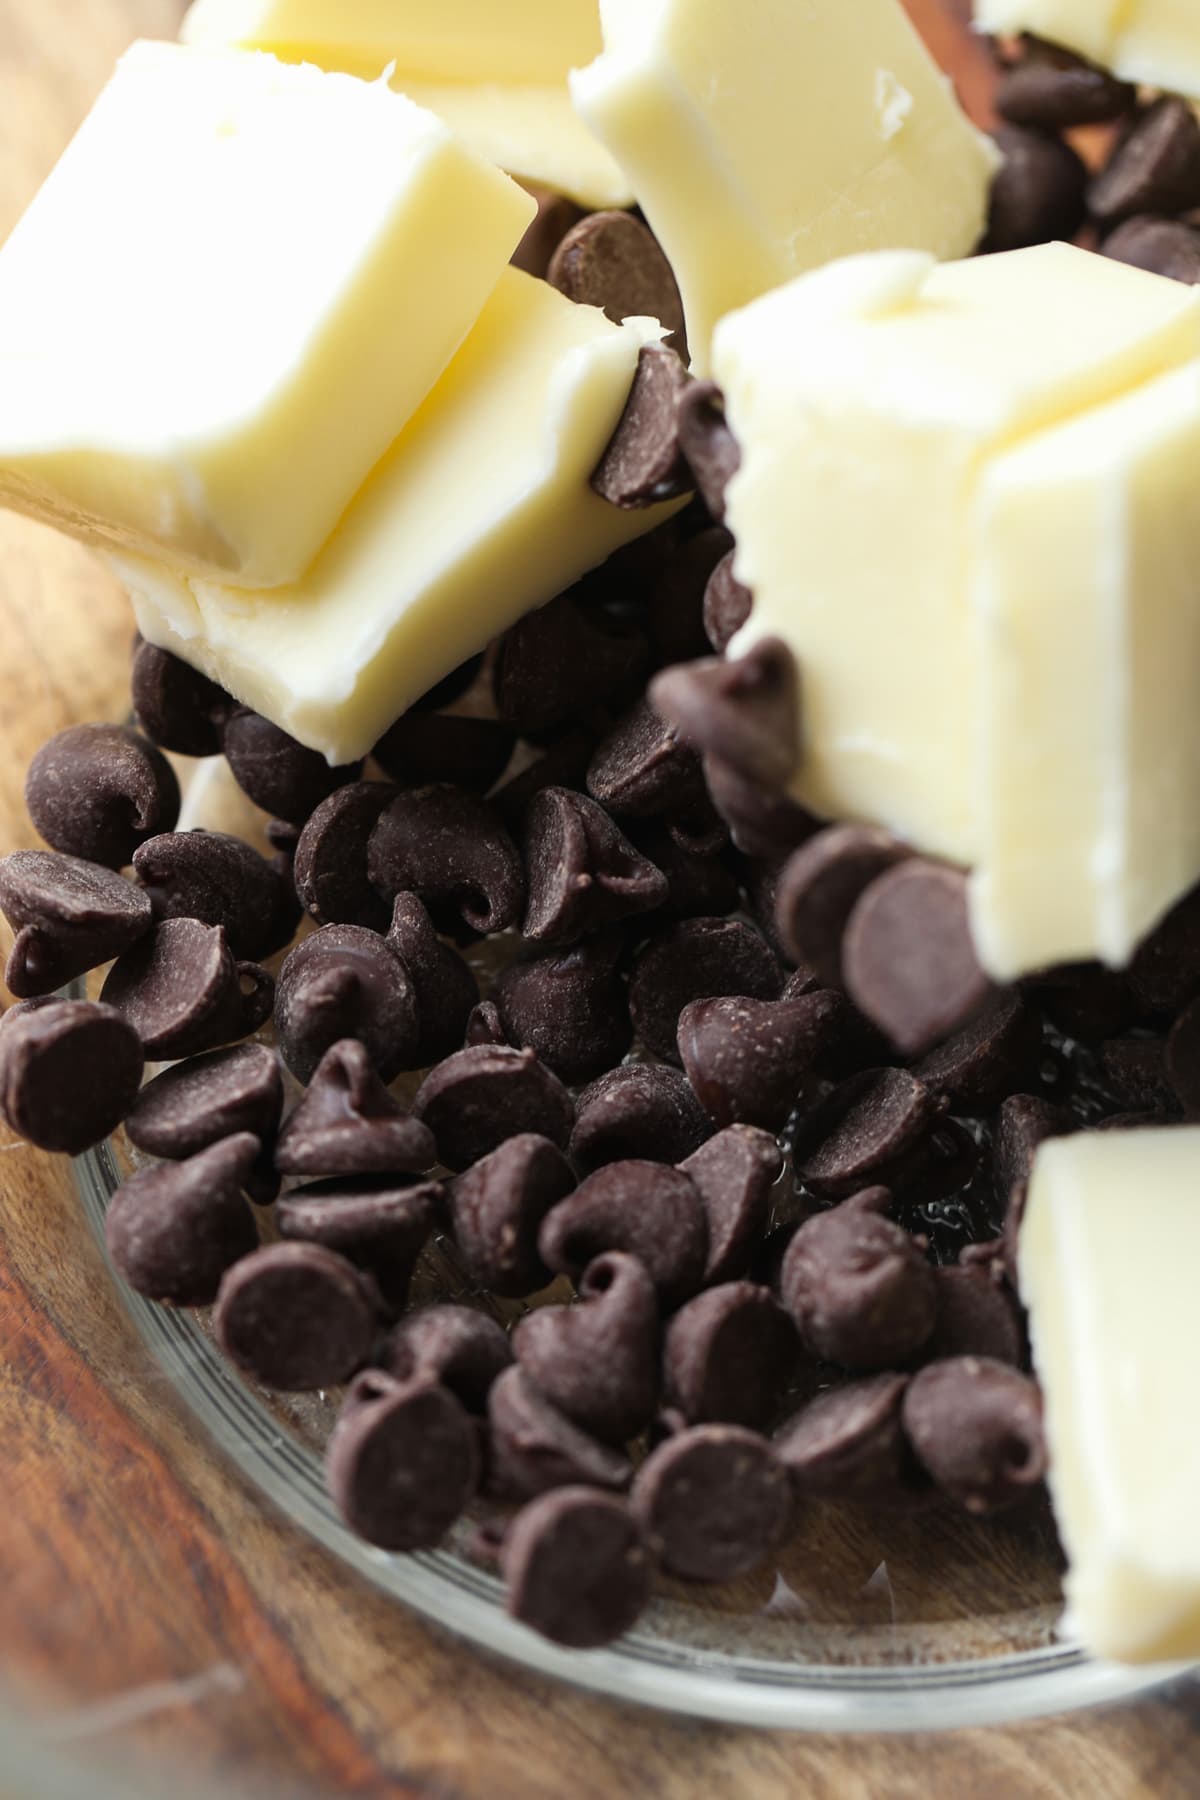 sliced butter and chocolate chips in a glass bowl.